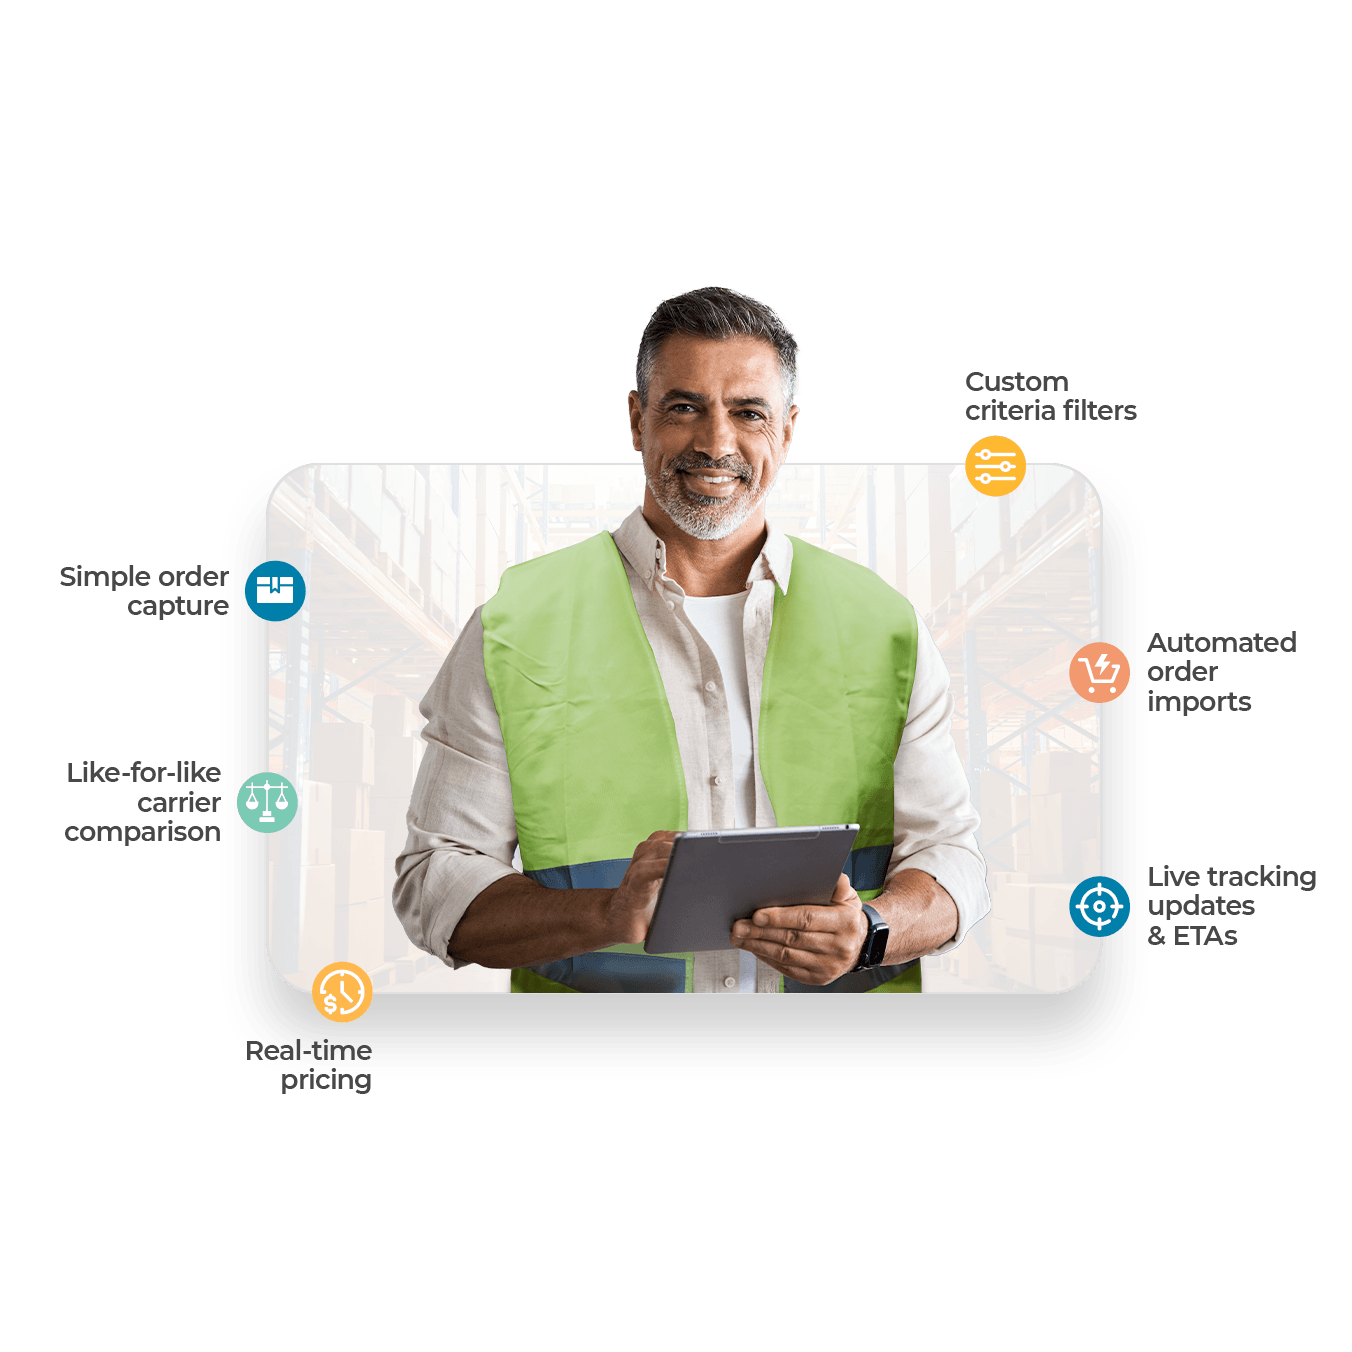 A smiling man in a green safety vest holds a tablet, standing in front of a colorful background with phrases like "Simple order capture," "Custom critical rates," "Automated order imports," "Live tracking," and "Like-for-like carrier comparison." MachShip it's your one-stop home for real-time pricing.